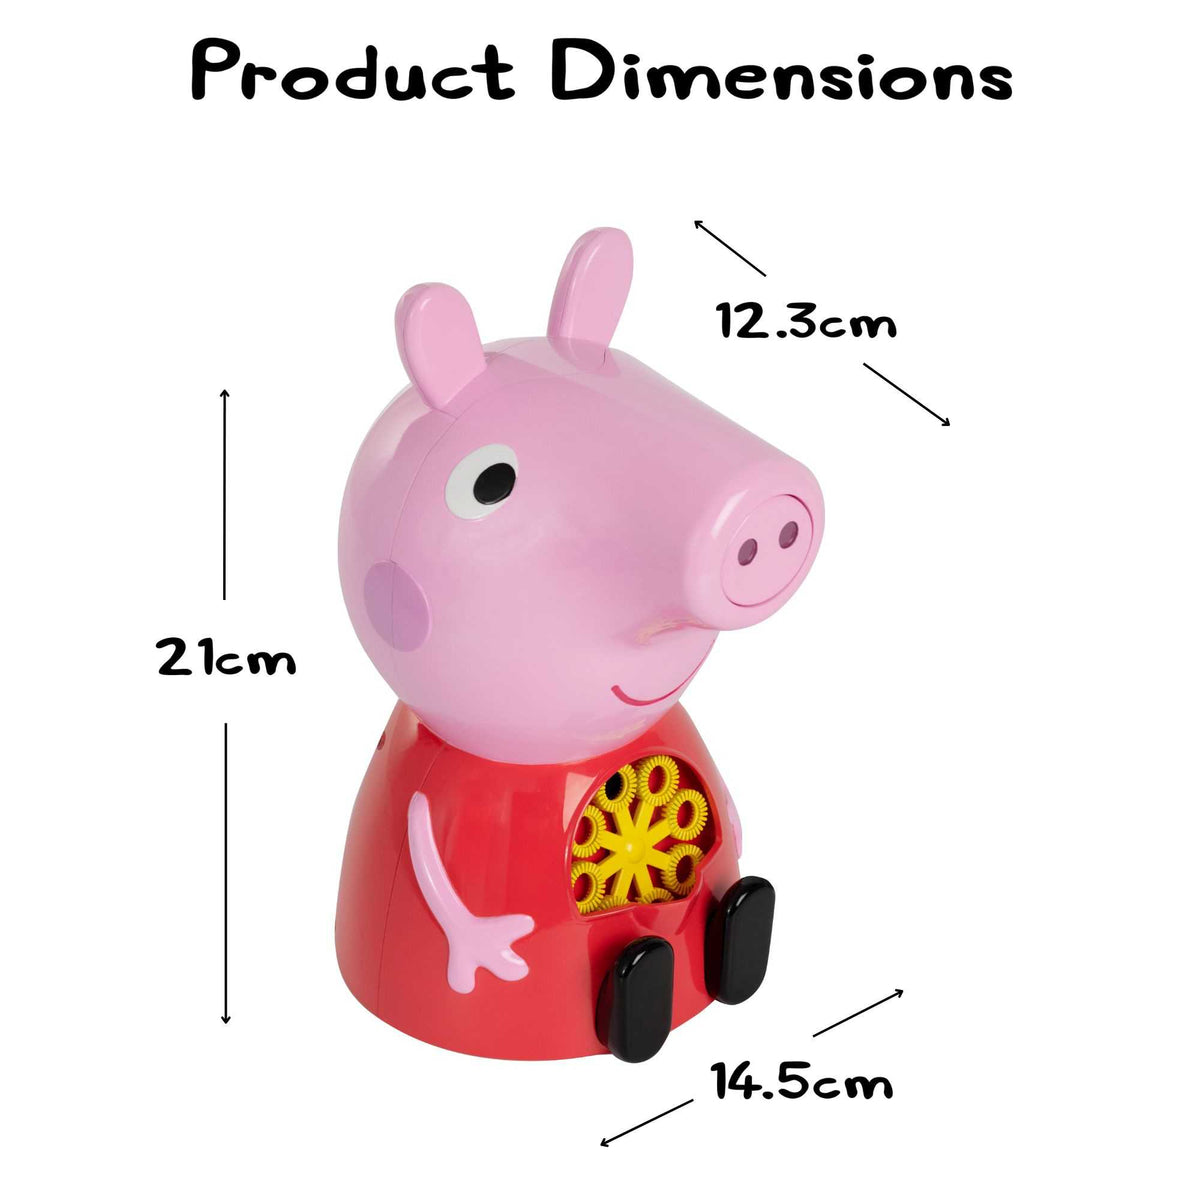 Peppa Pig bubble Machine | Includes 118ml Solution